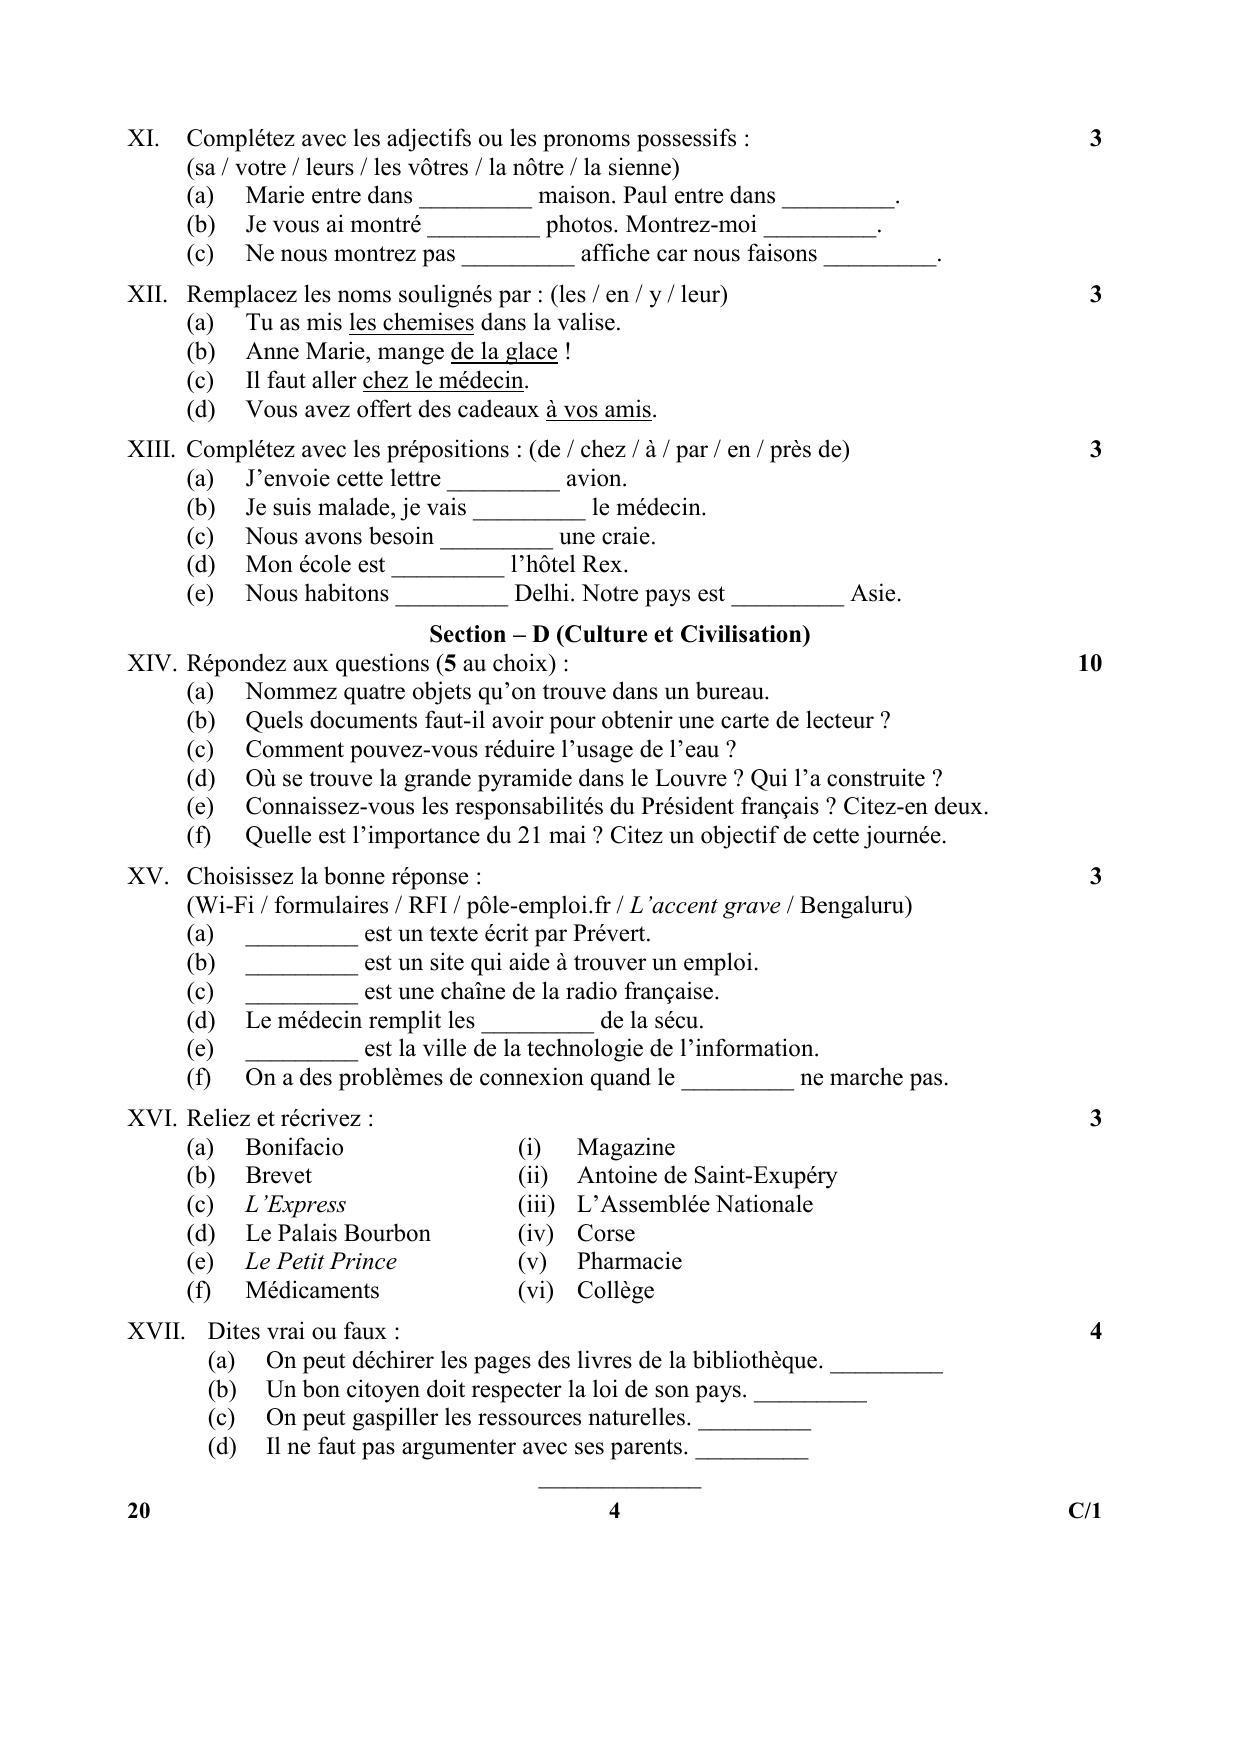 CBSE Class 10 20 (French) 2018 Compartment Question Paper - Page 4